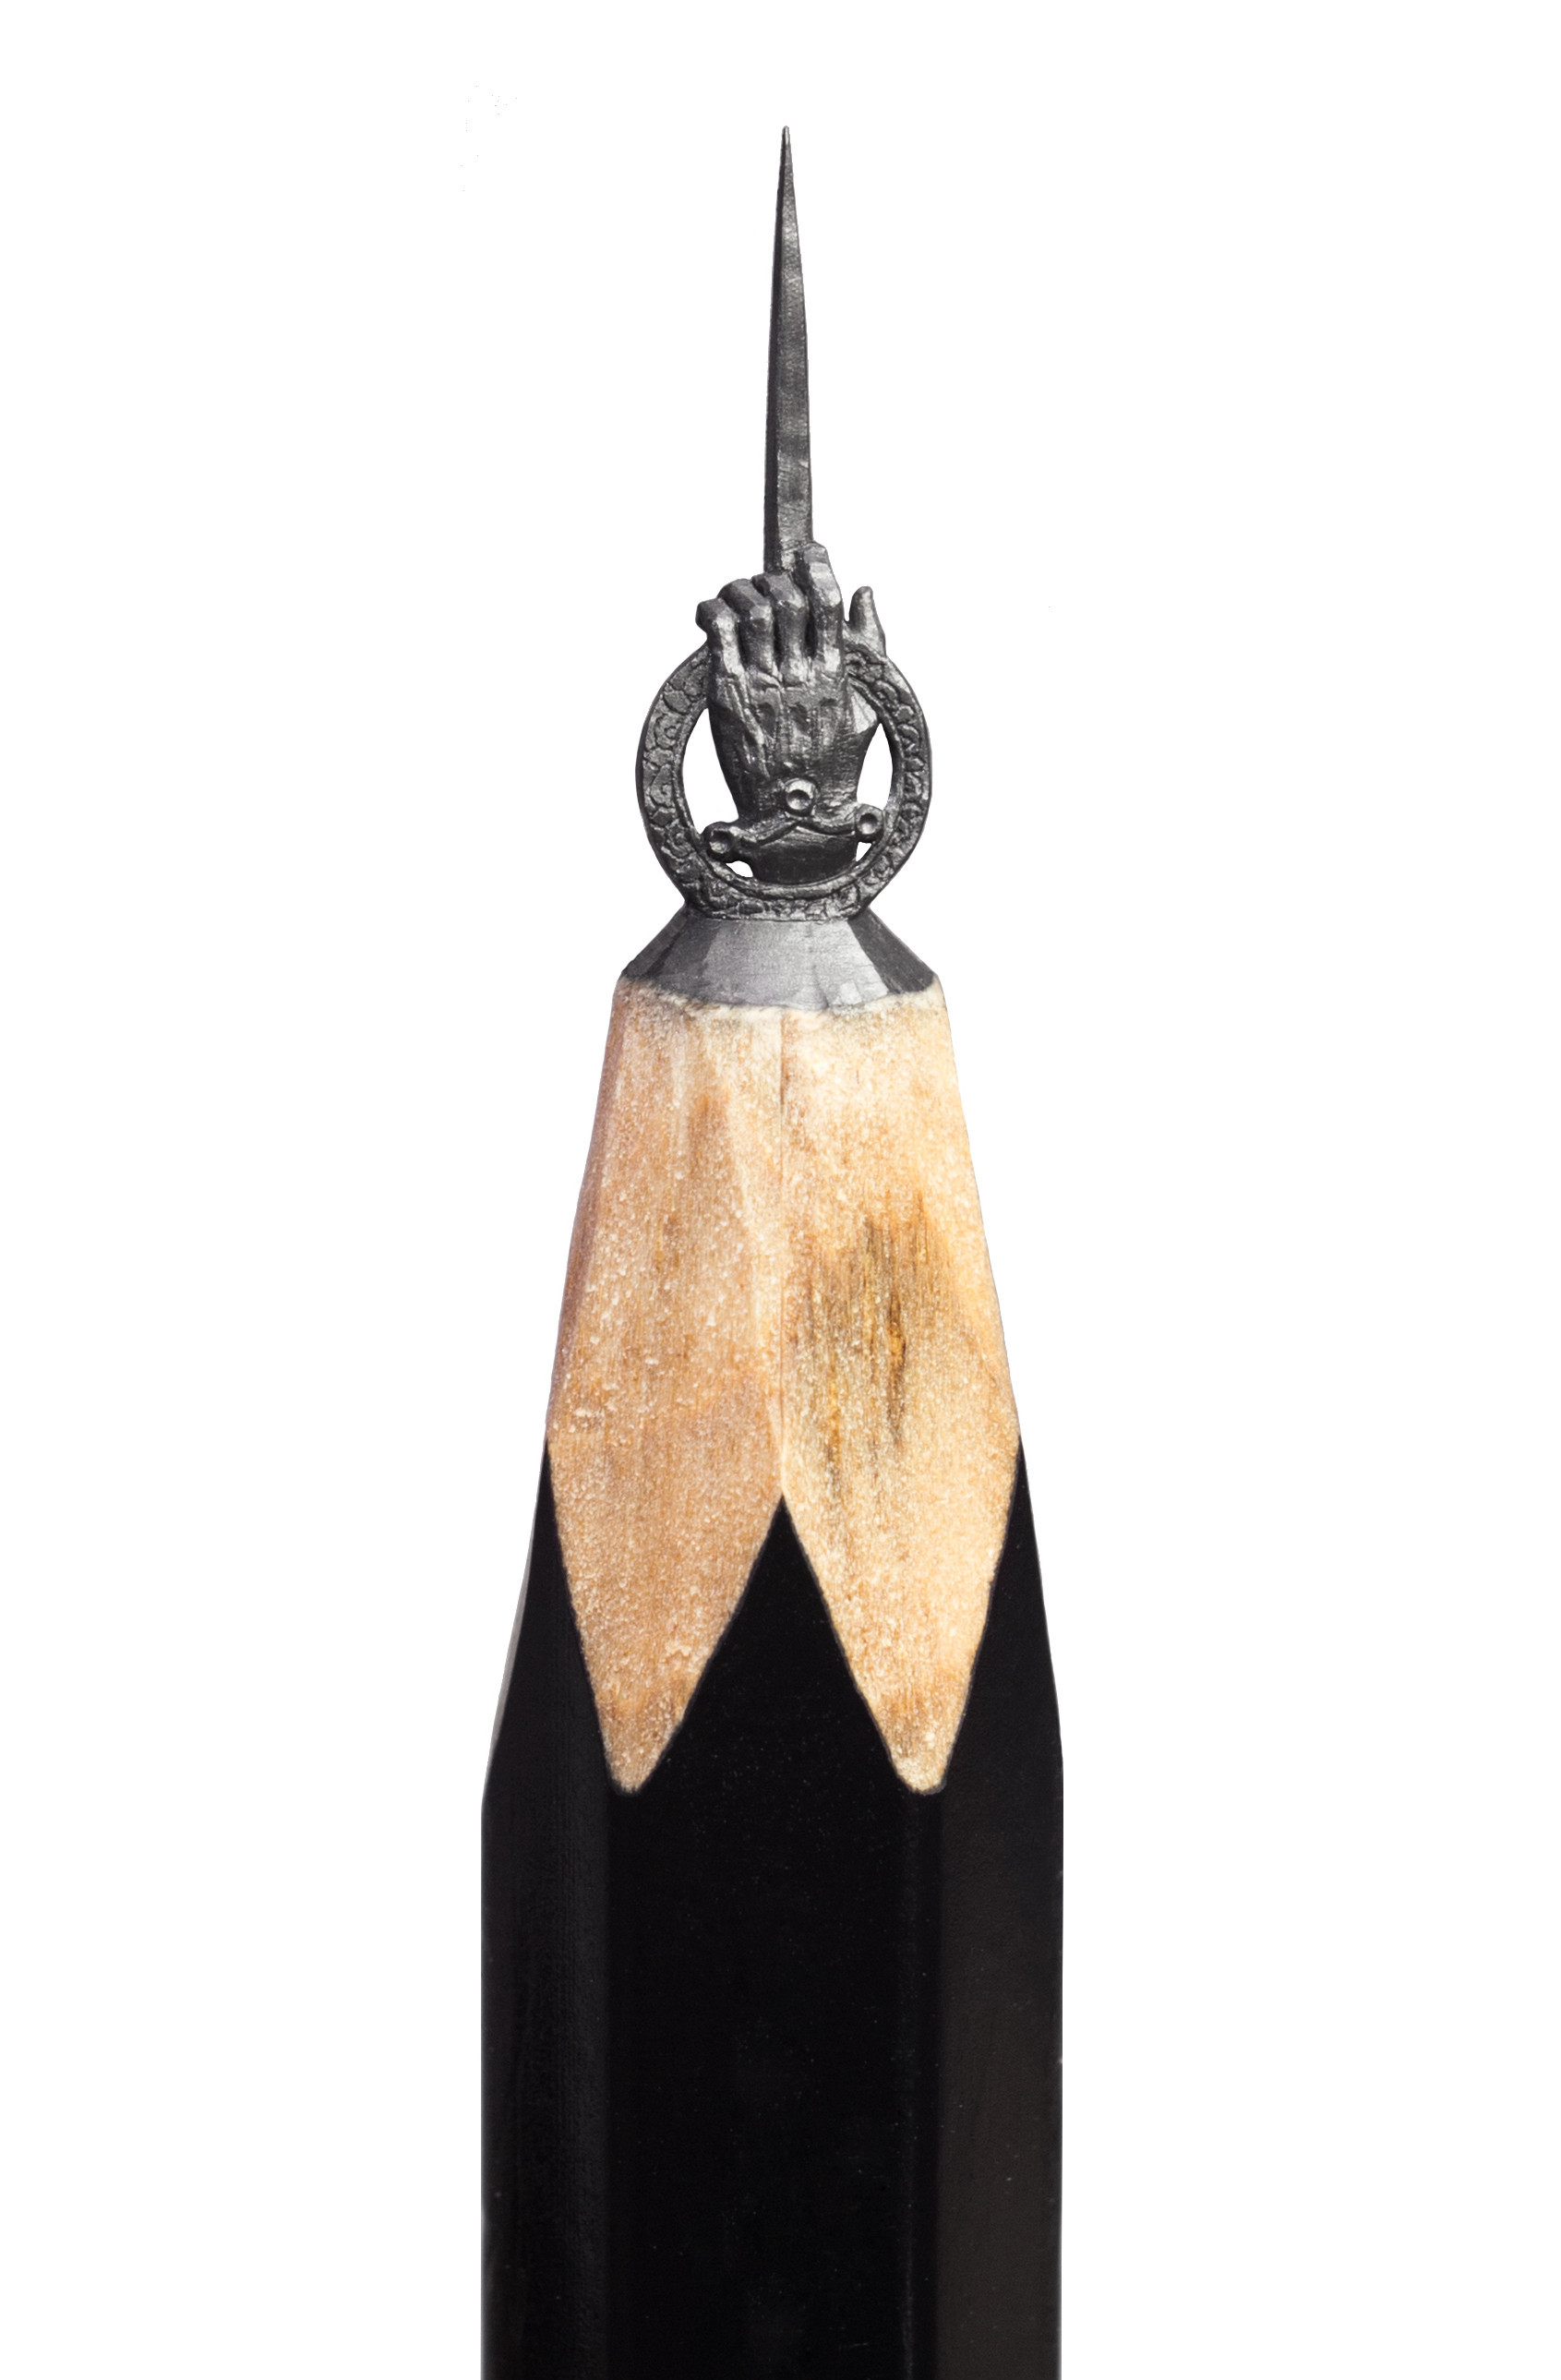 GAME OF THRONES Pencil Microscupture Exhibition - Hand Of The King pin